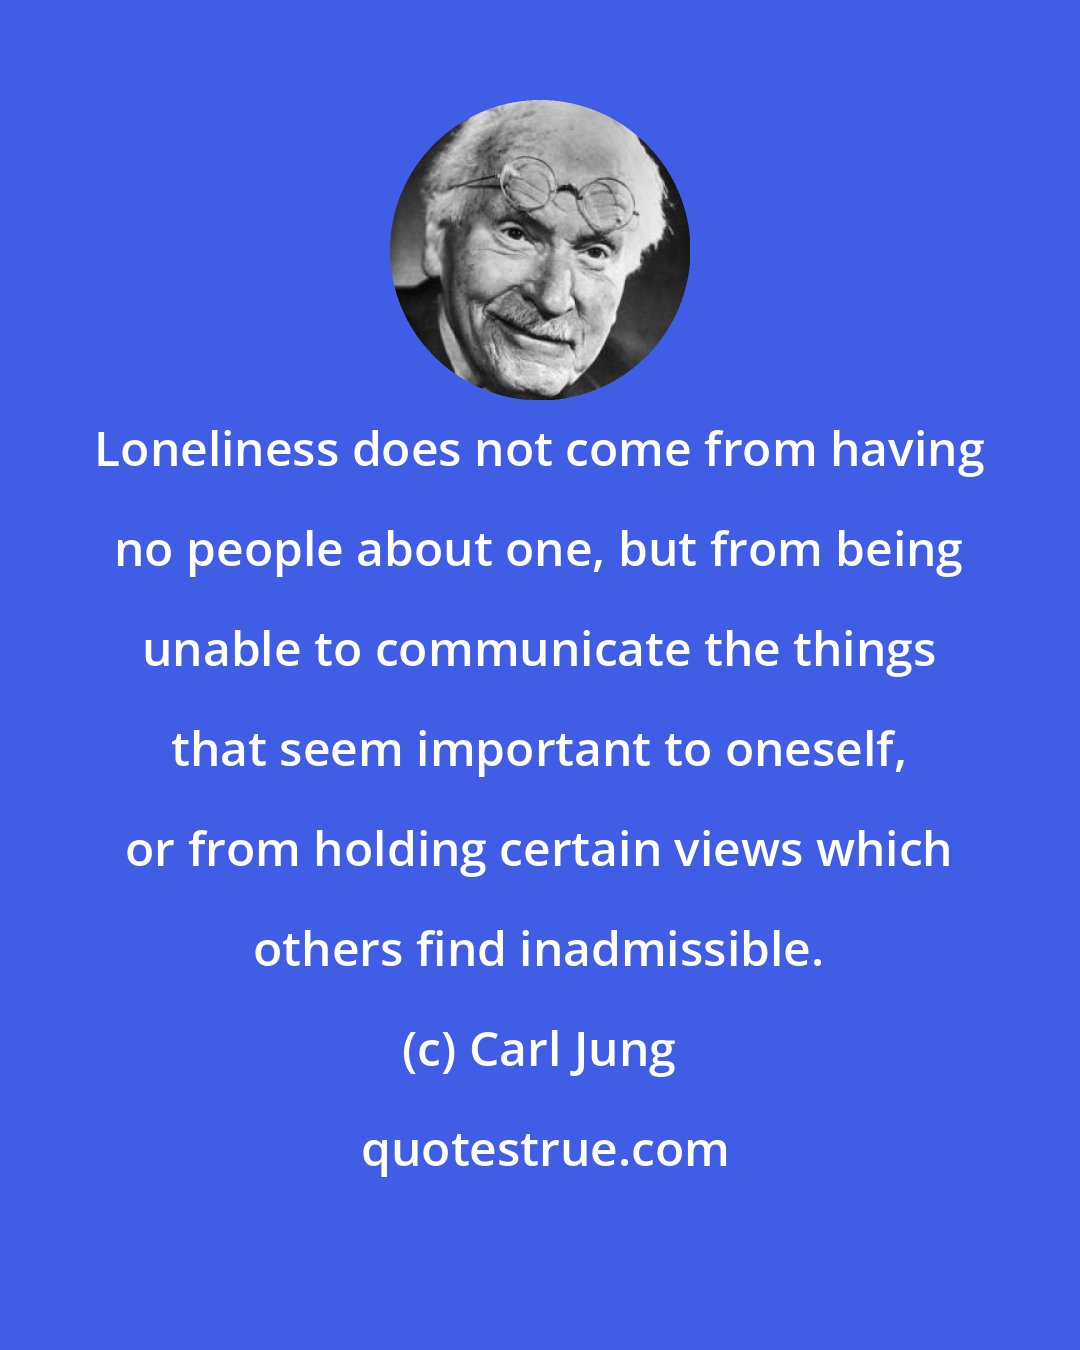 Carl Jung: Loneliness does not come from having no people about one, but from being unable to communicate the things that seem important to oneself, or from holding certain views which others find inadmissible.